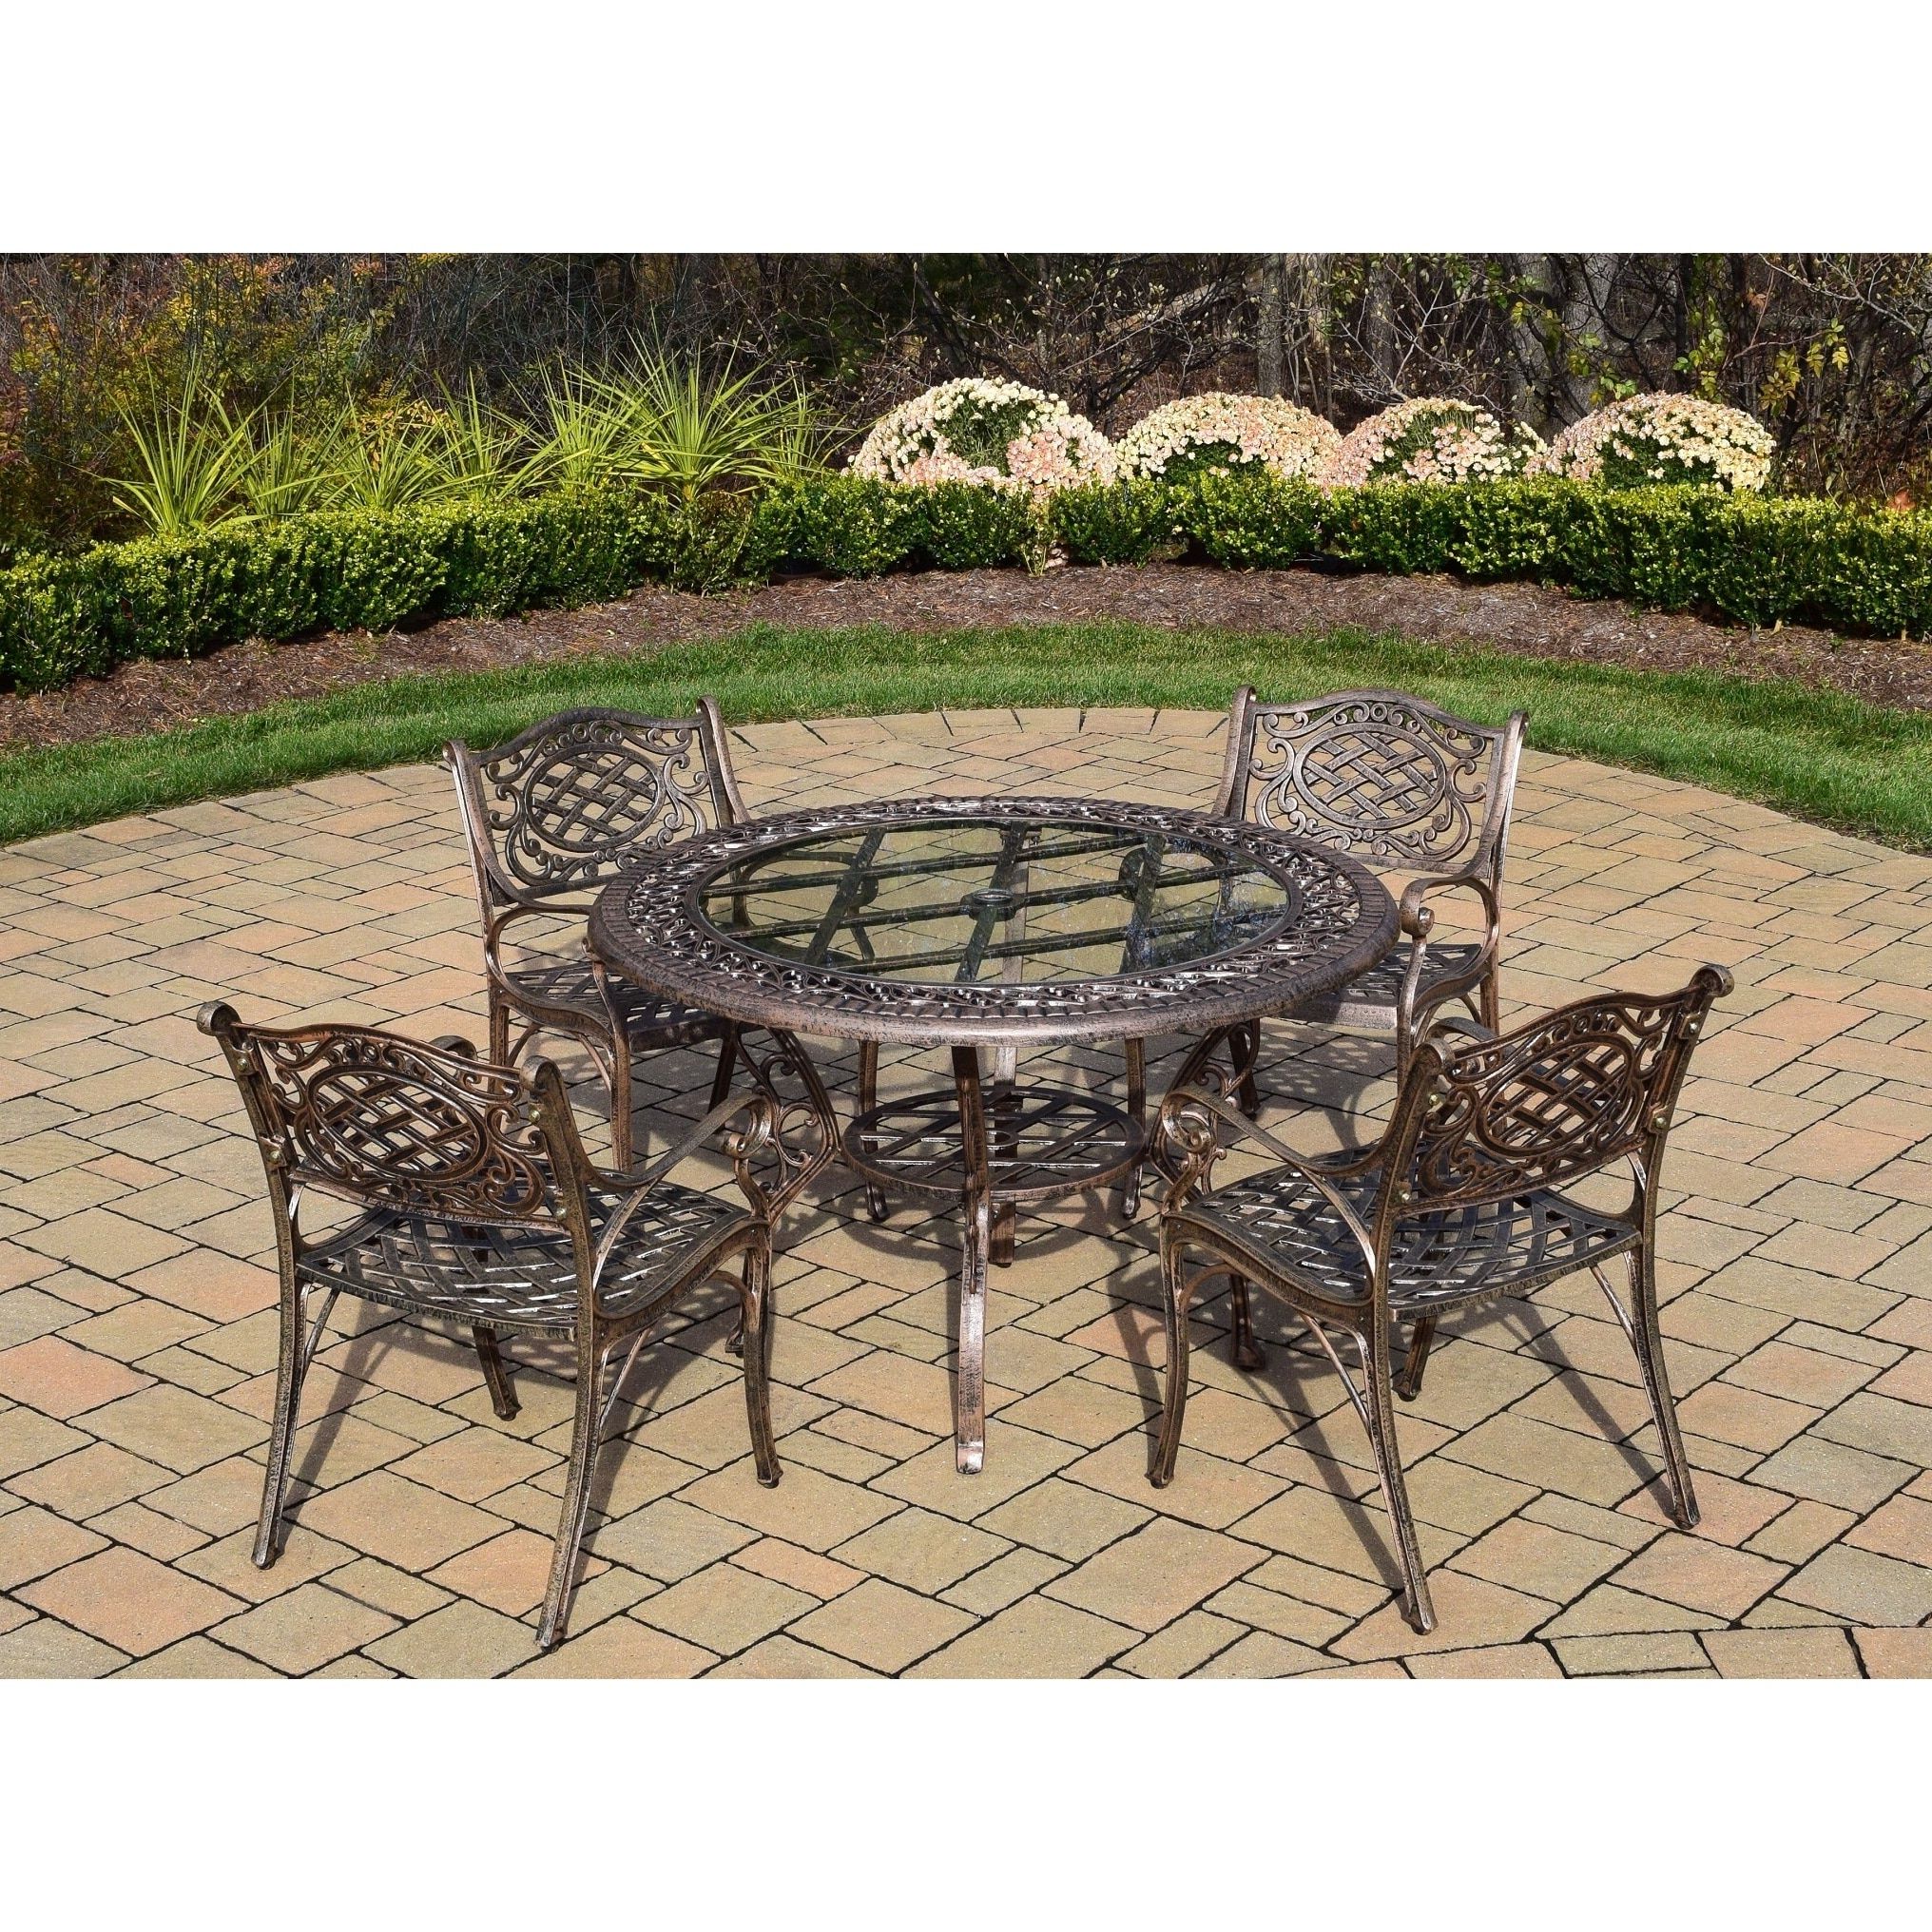 Oakland Living Corporation 5 Piece Patio Dining Set, With 48 Inch Round With Regard To Newest 5 Piece Round Patio Dining Sets (View 14 of 15)